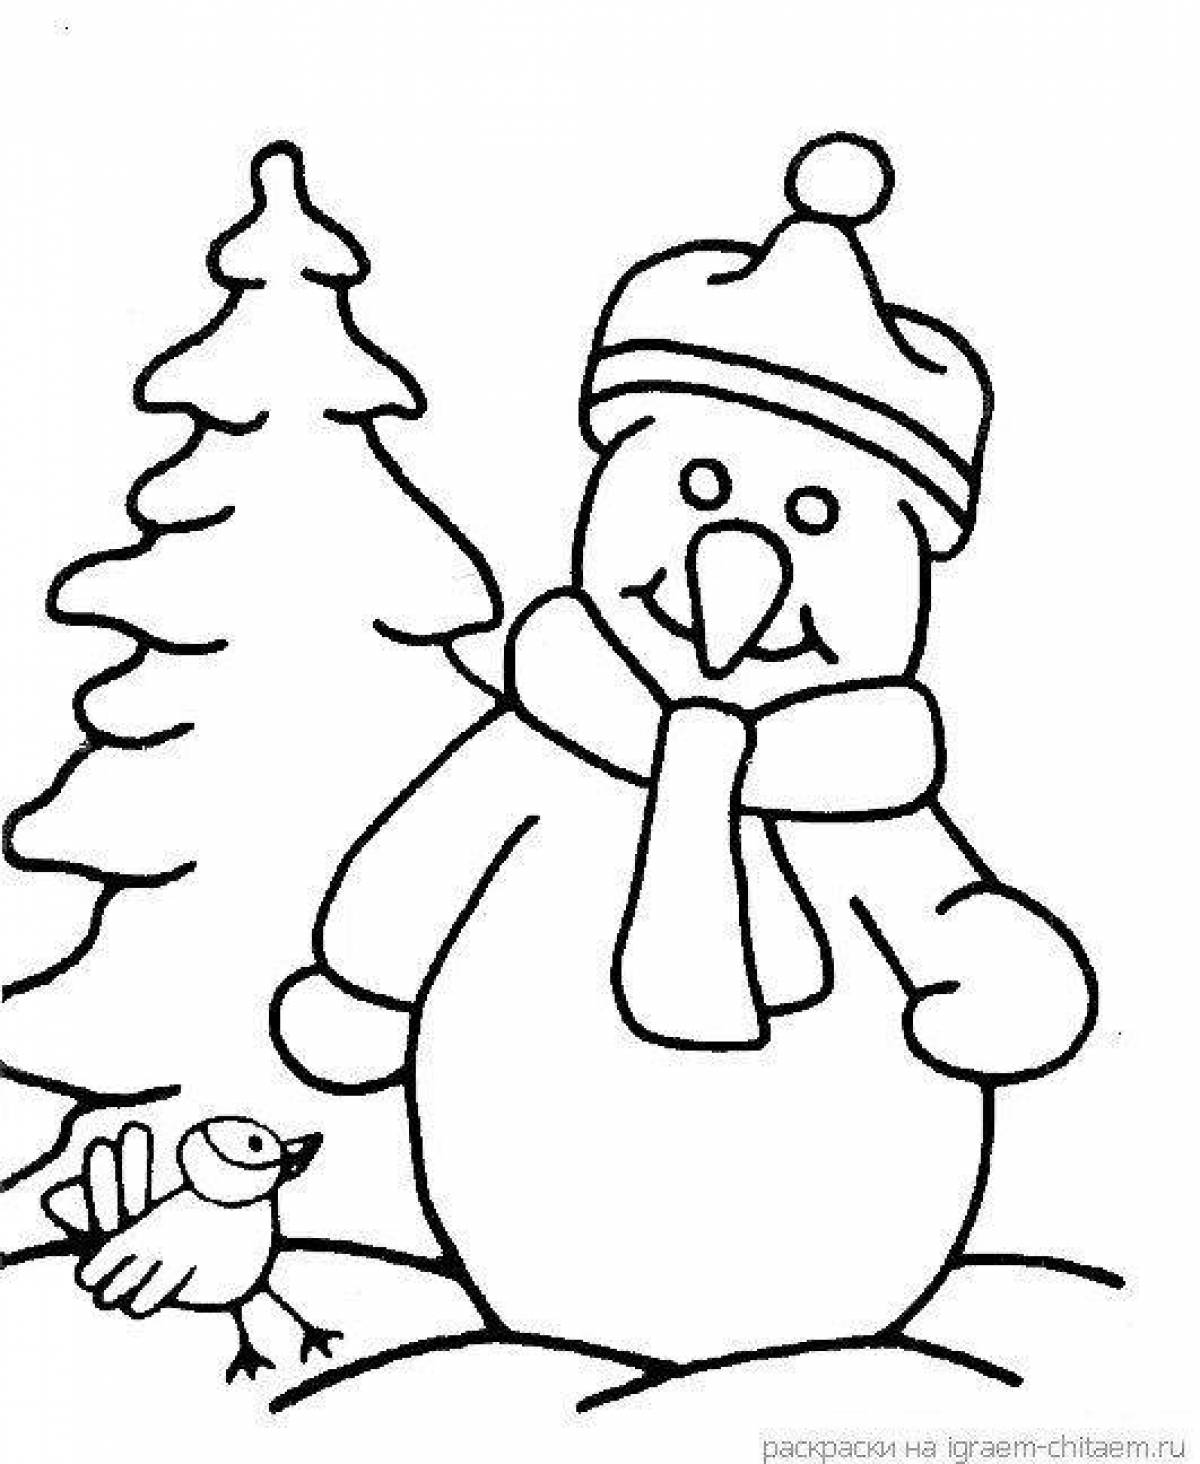 Naughty snowman coloring page